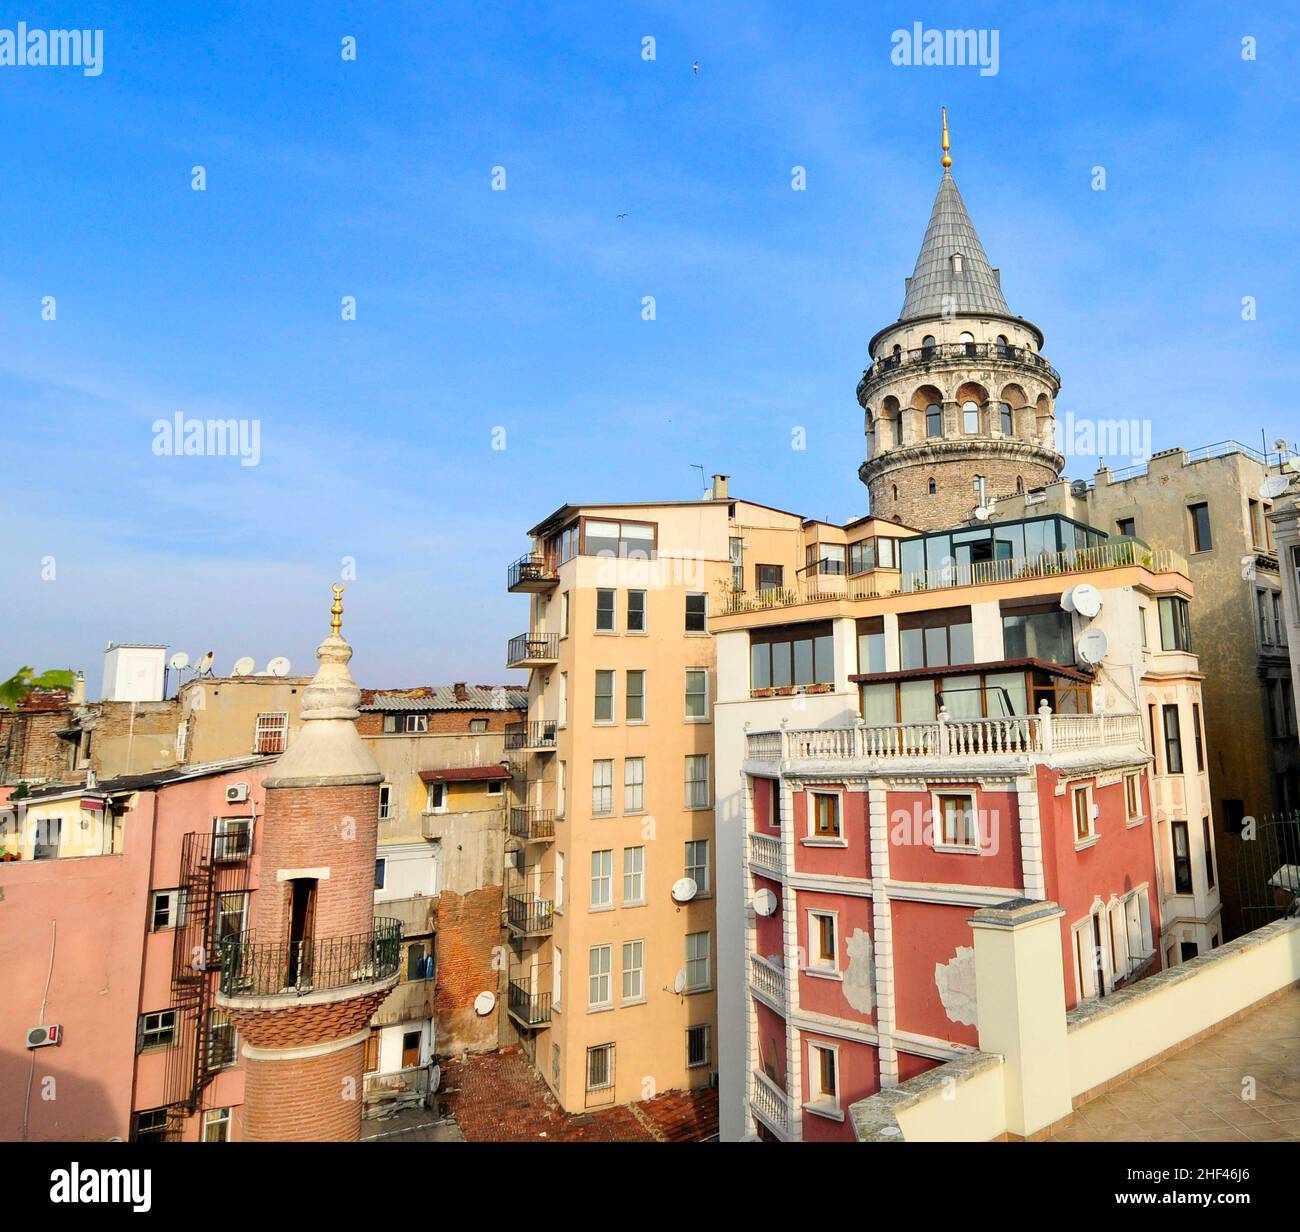 The Galata tower in Istanbul, Turkey Stock Photo